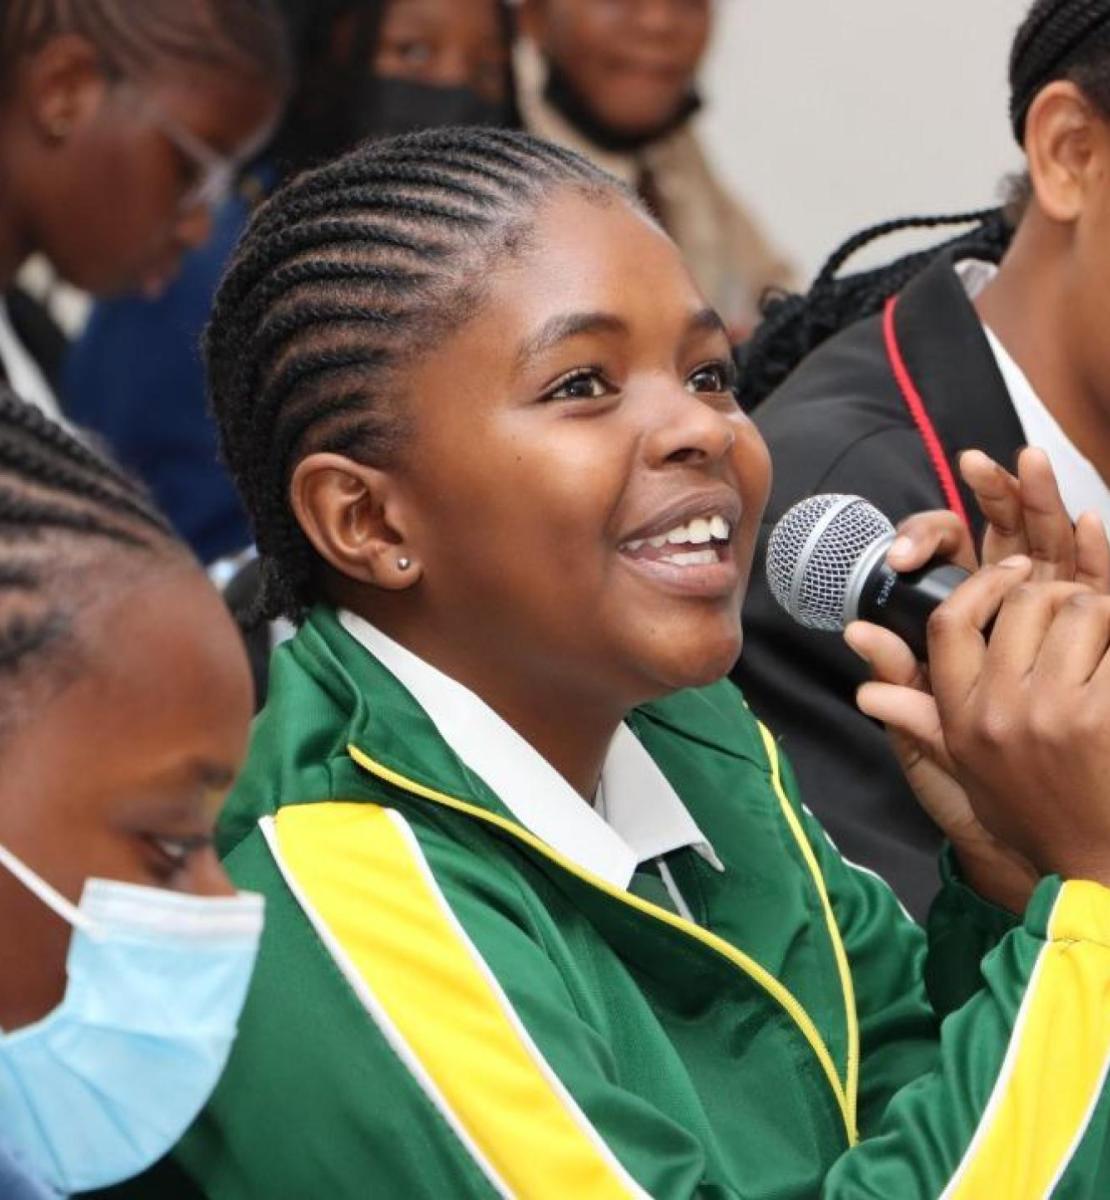 A young Namibian girl wearing a green tracksuit is sitting in a room with other girls and speaking at a microphone with a smile.